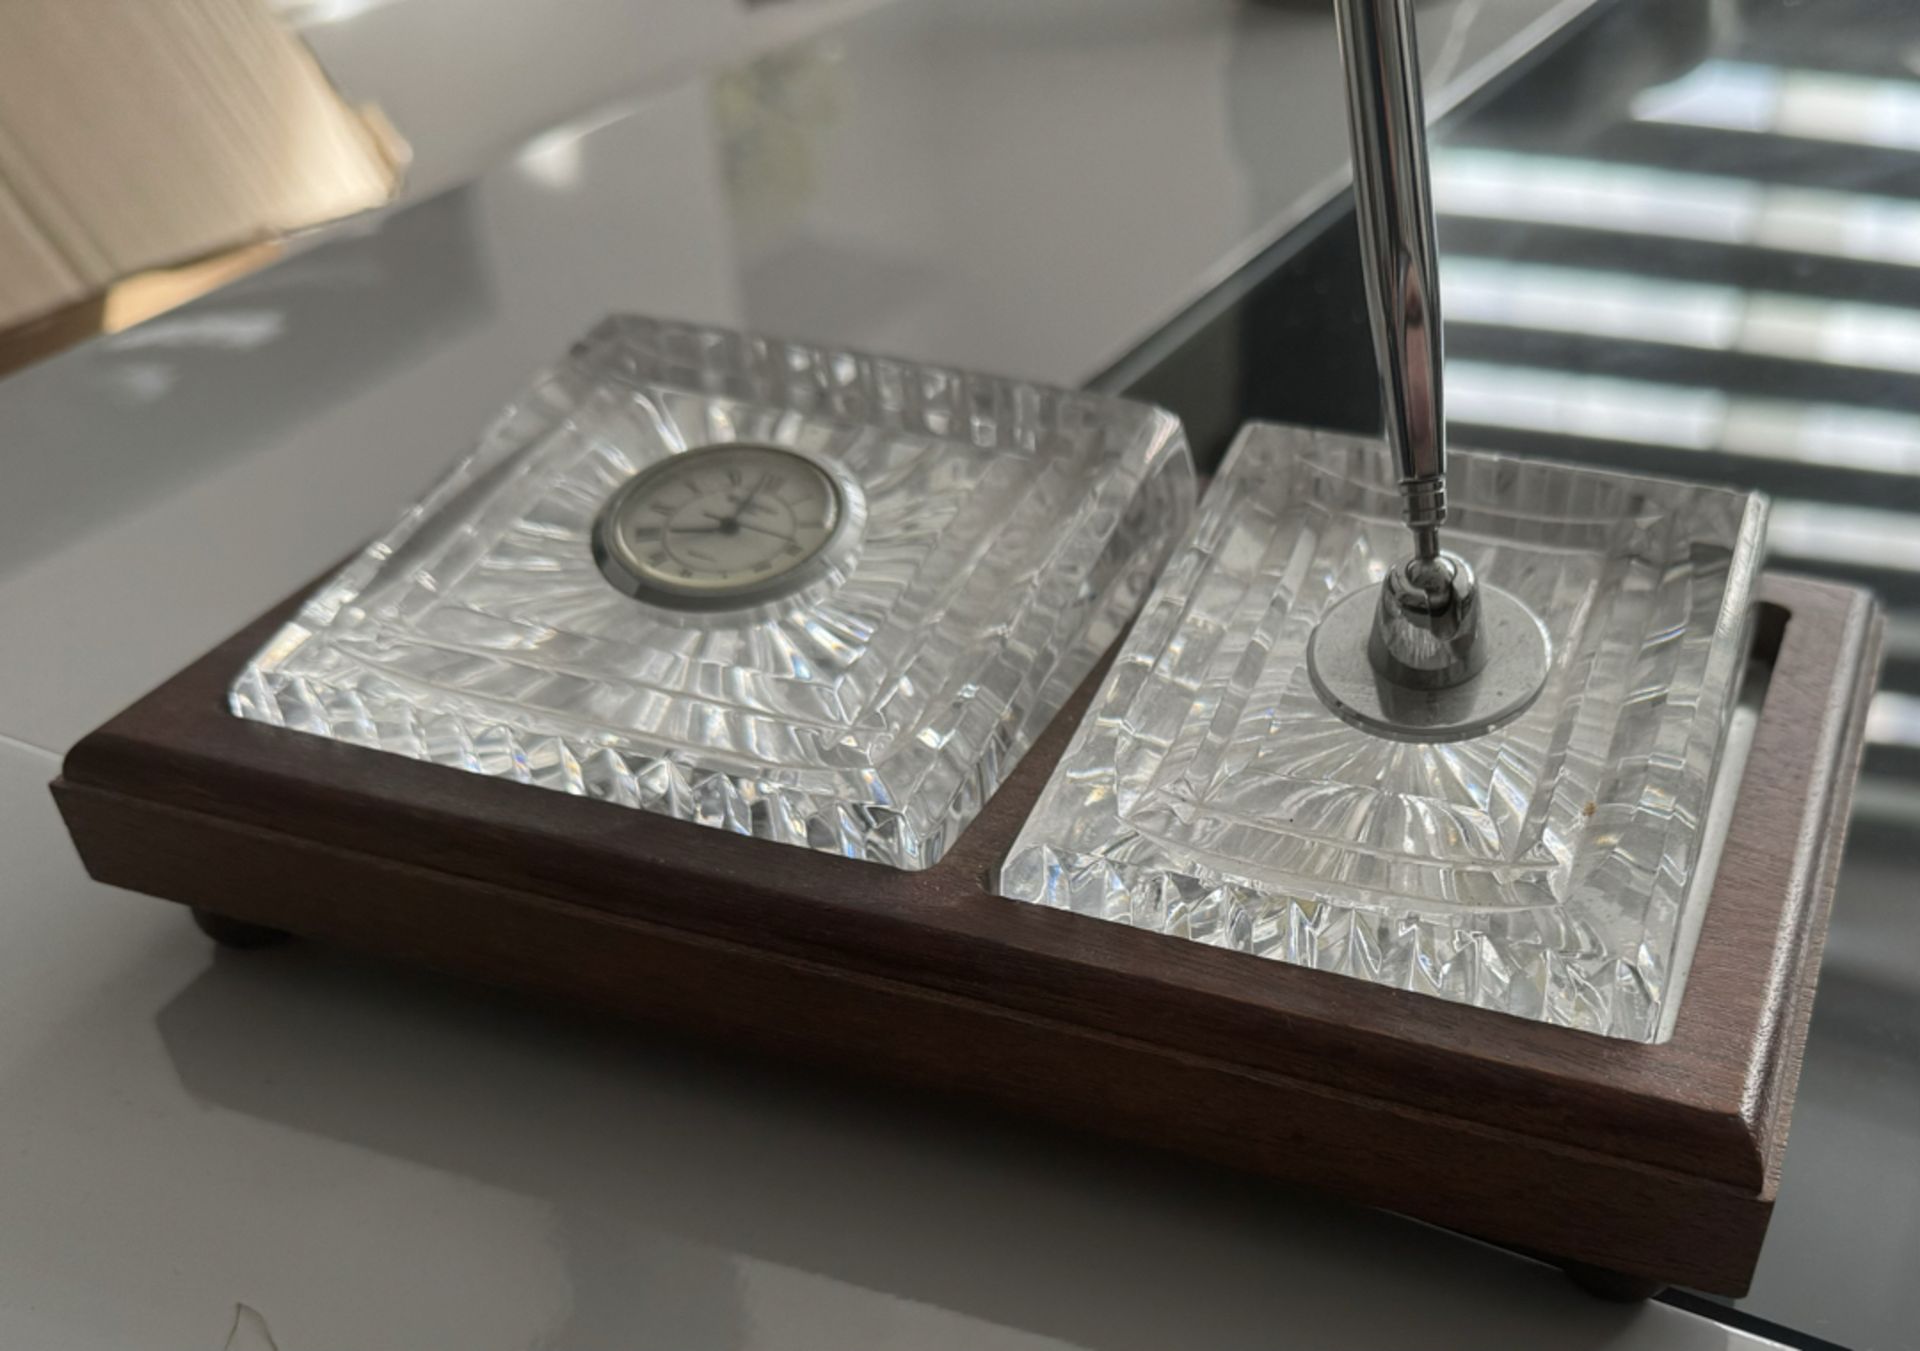 Waterford Crystal Quartz Clock and Pen Set on Wooden Base - Image 2 of 3